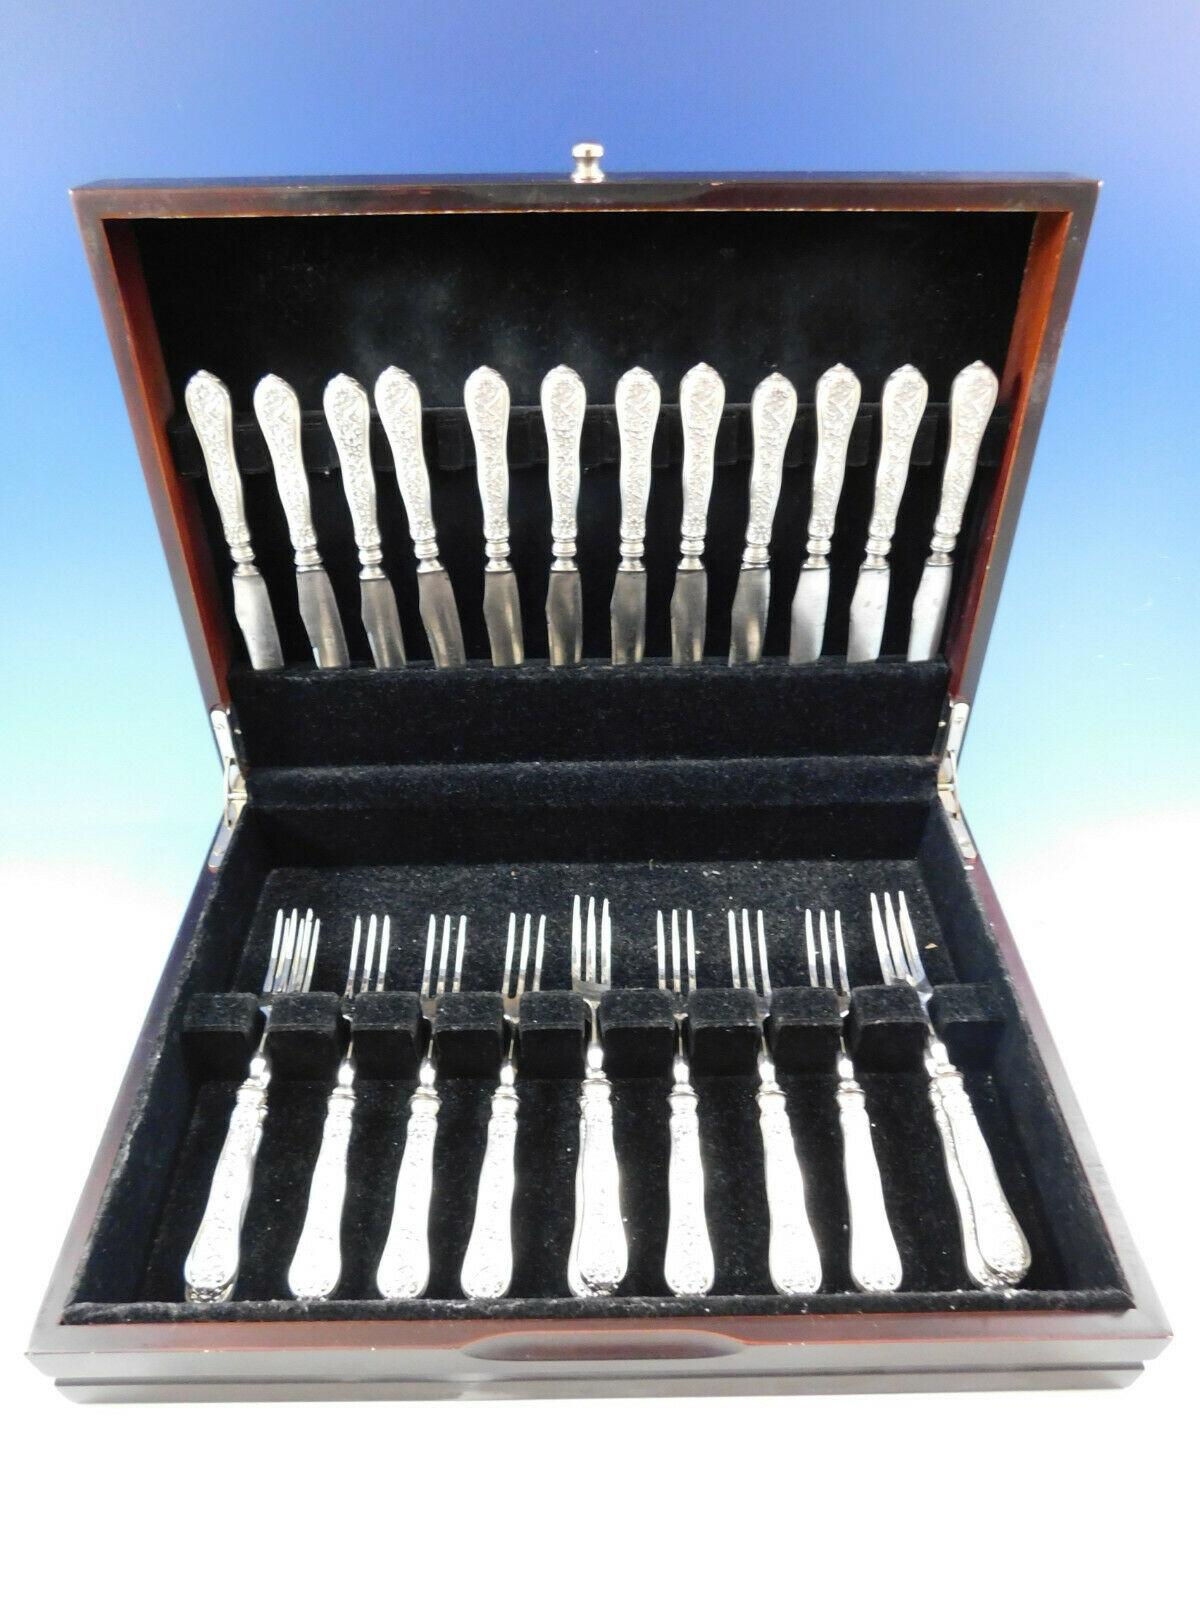 Superb dinner size Olympian by Tiffany & Co. sterling silver flatware set - 59 pieces. This set includes:

8 large dinner size knives, 10 1/4